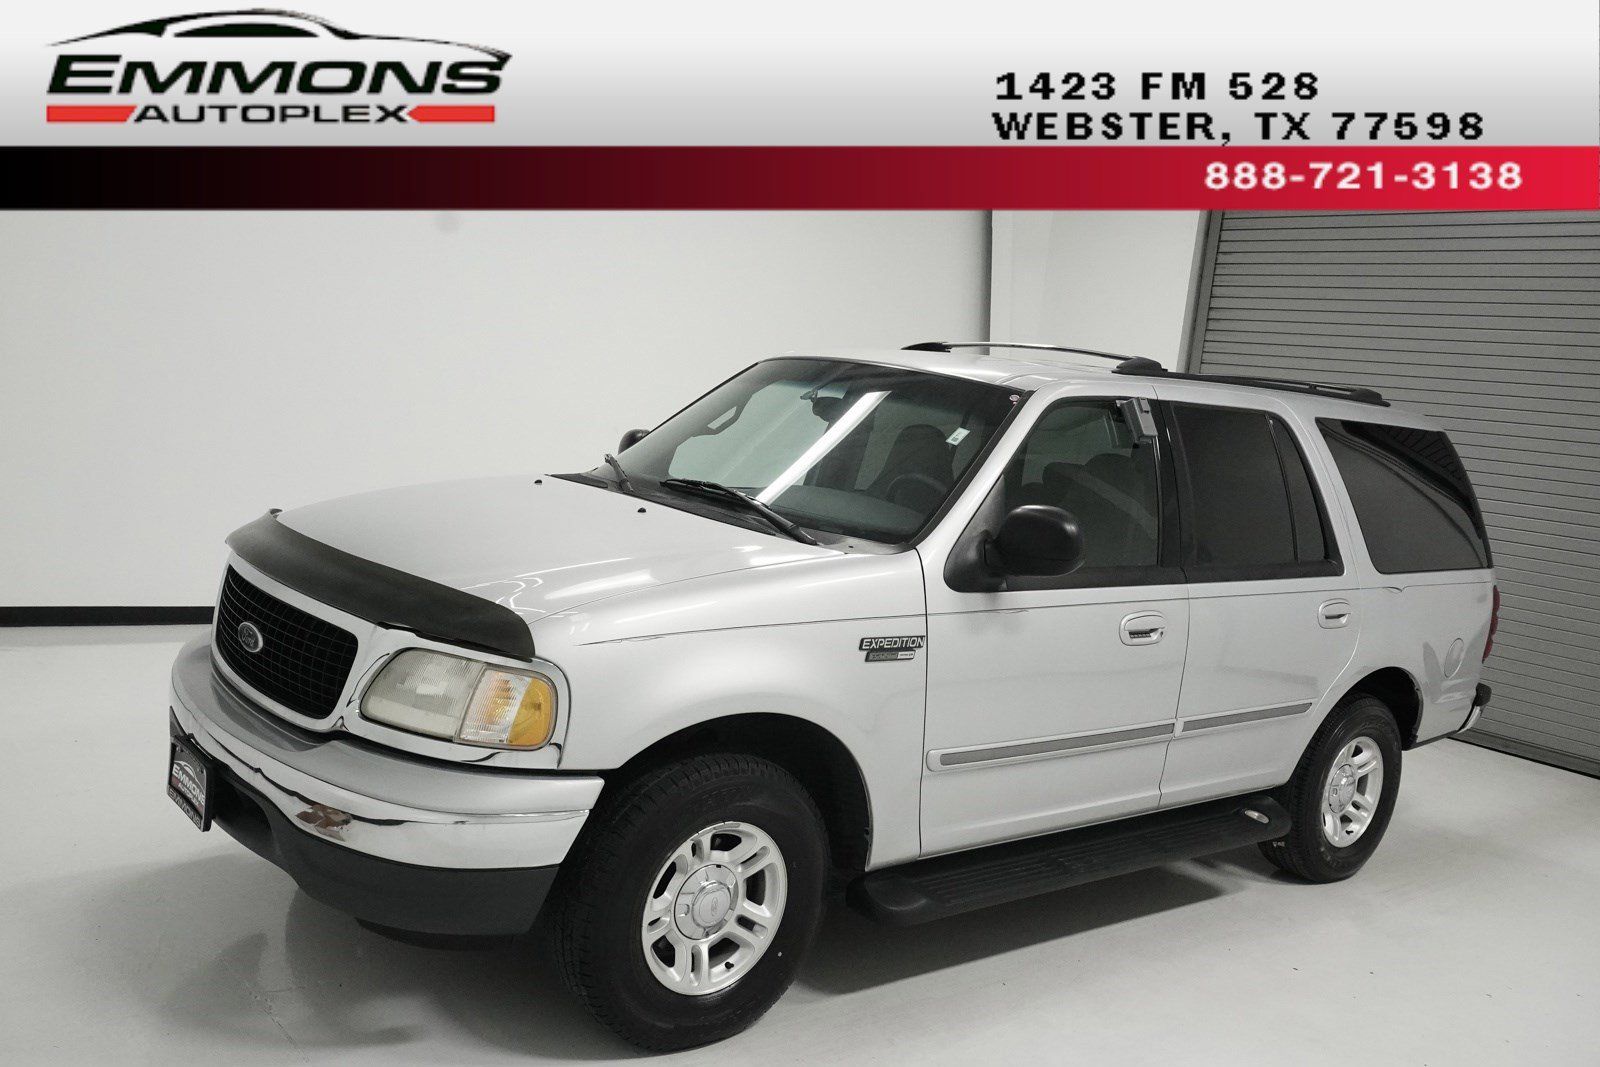 Used 2001 Ford Expedition